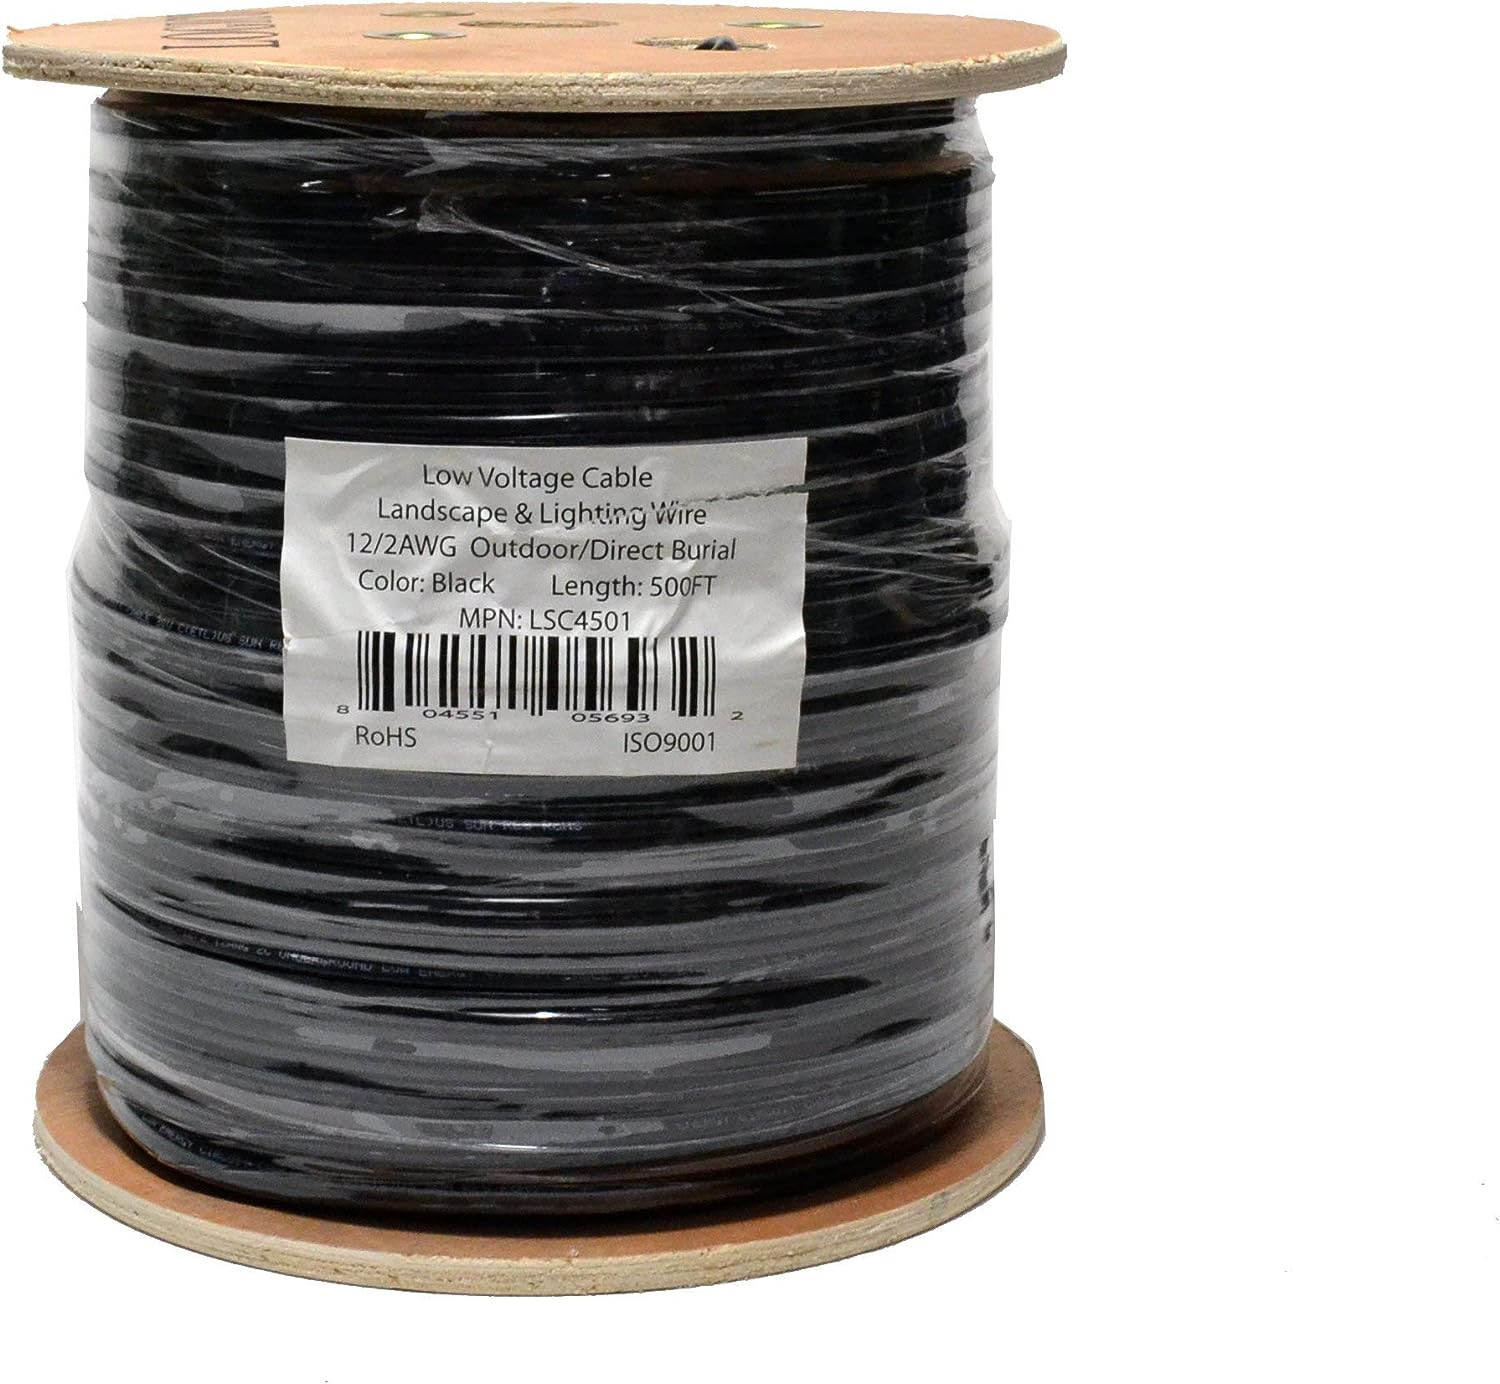 Cerrowire 250 ft. 18 Gauge Stranded SD Bare Copper Grounding Wire